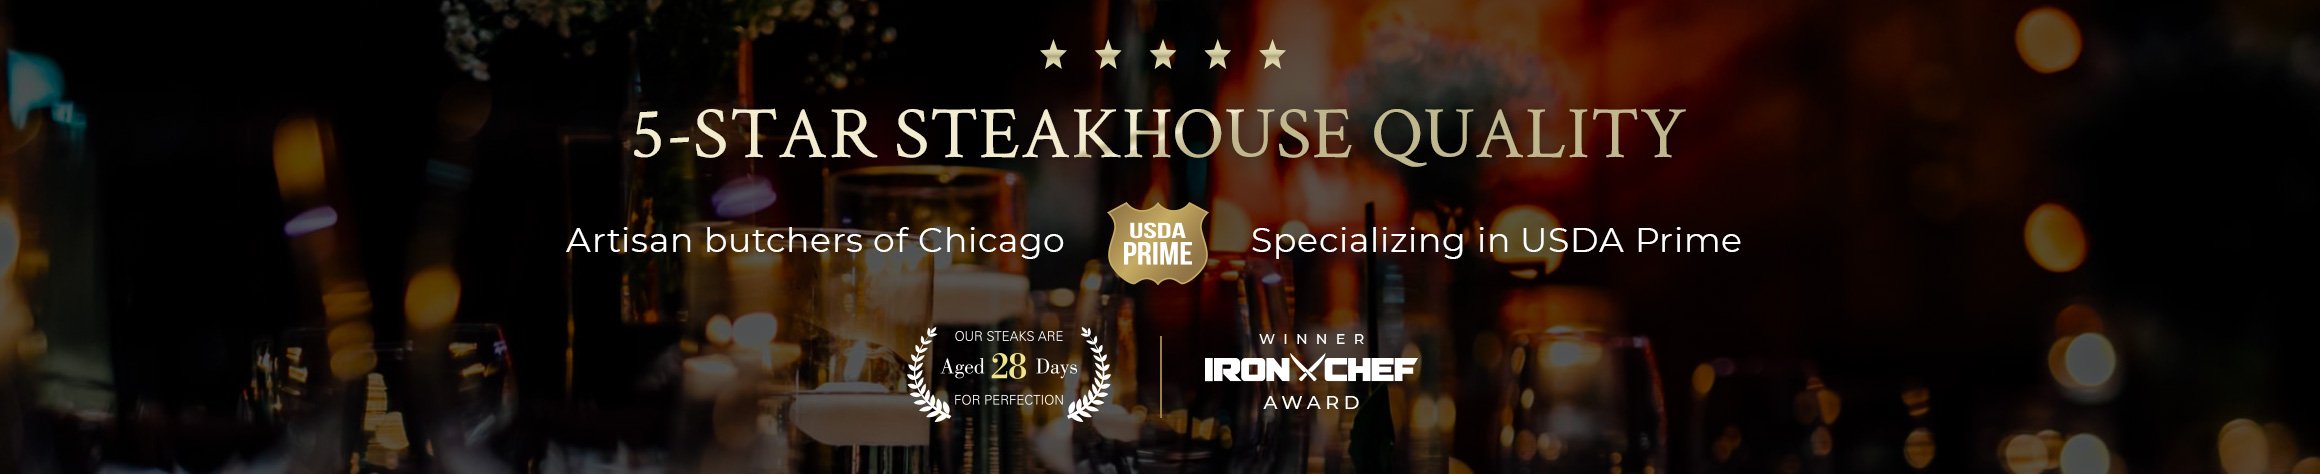 5-Star Steakhouse Quality | Artisan butchers of Chicago Specializing in USDA Prime | Iron Chef Award | Steaks Aged 28 Days